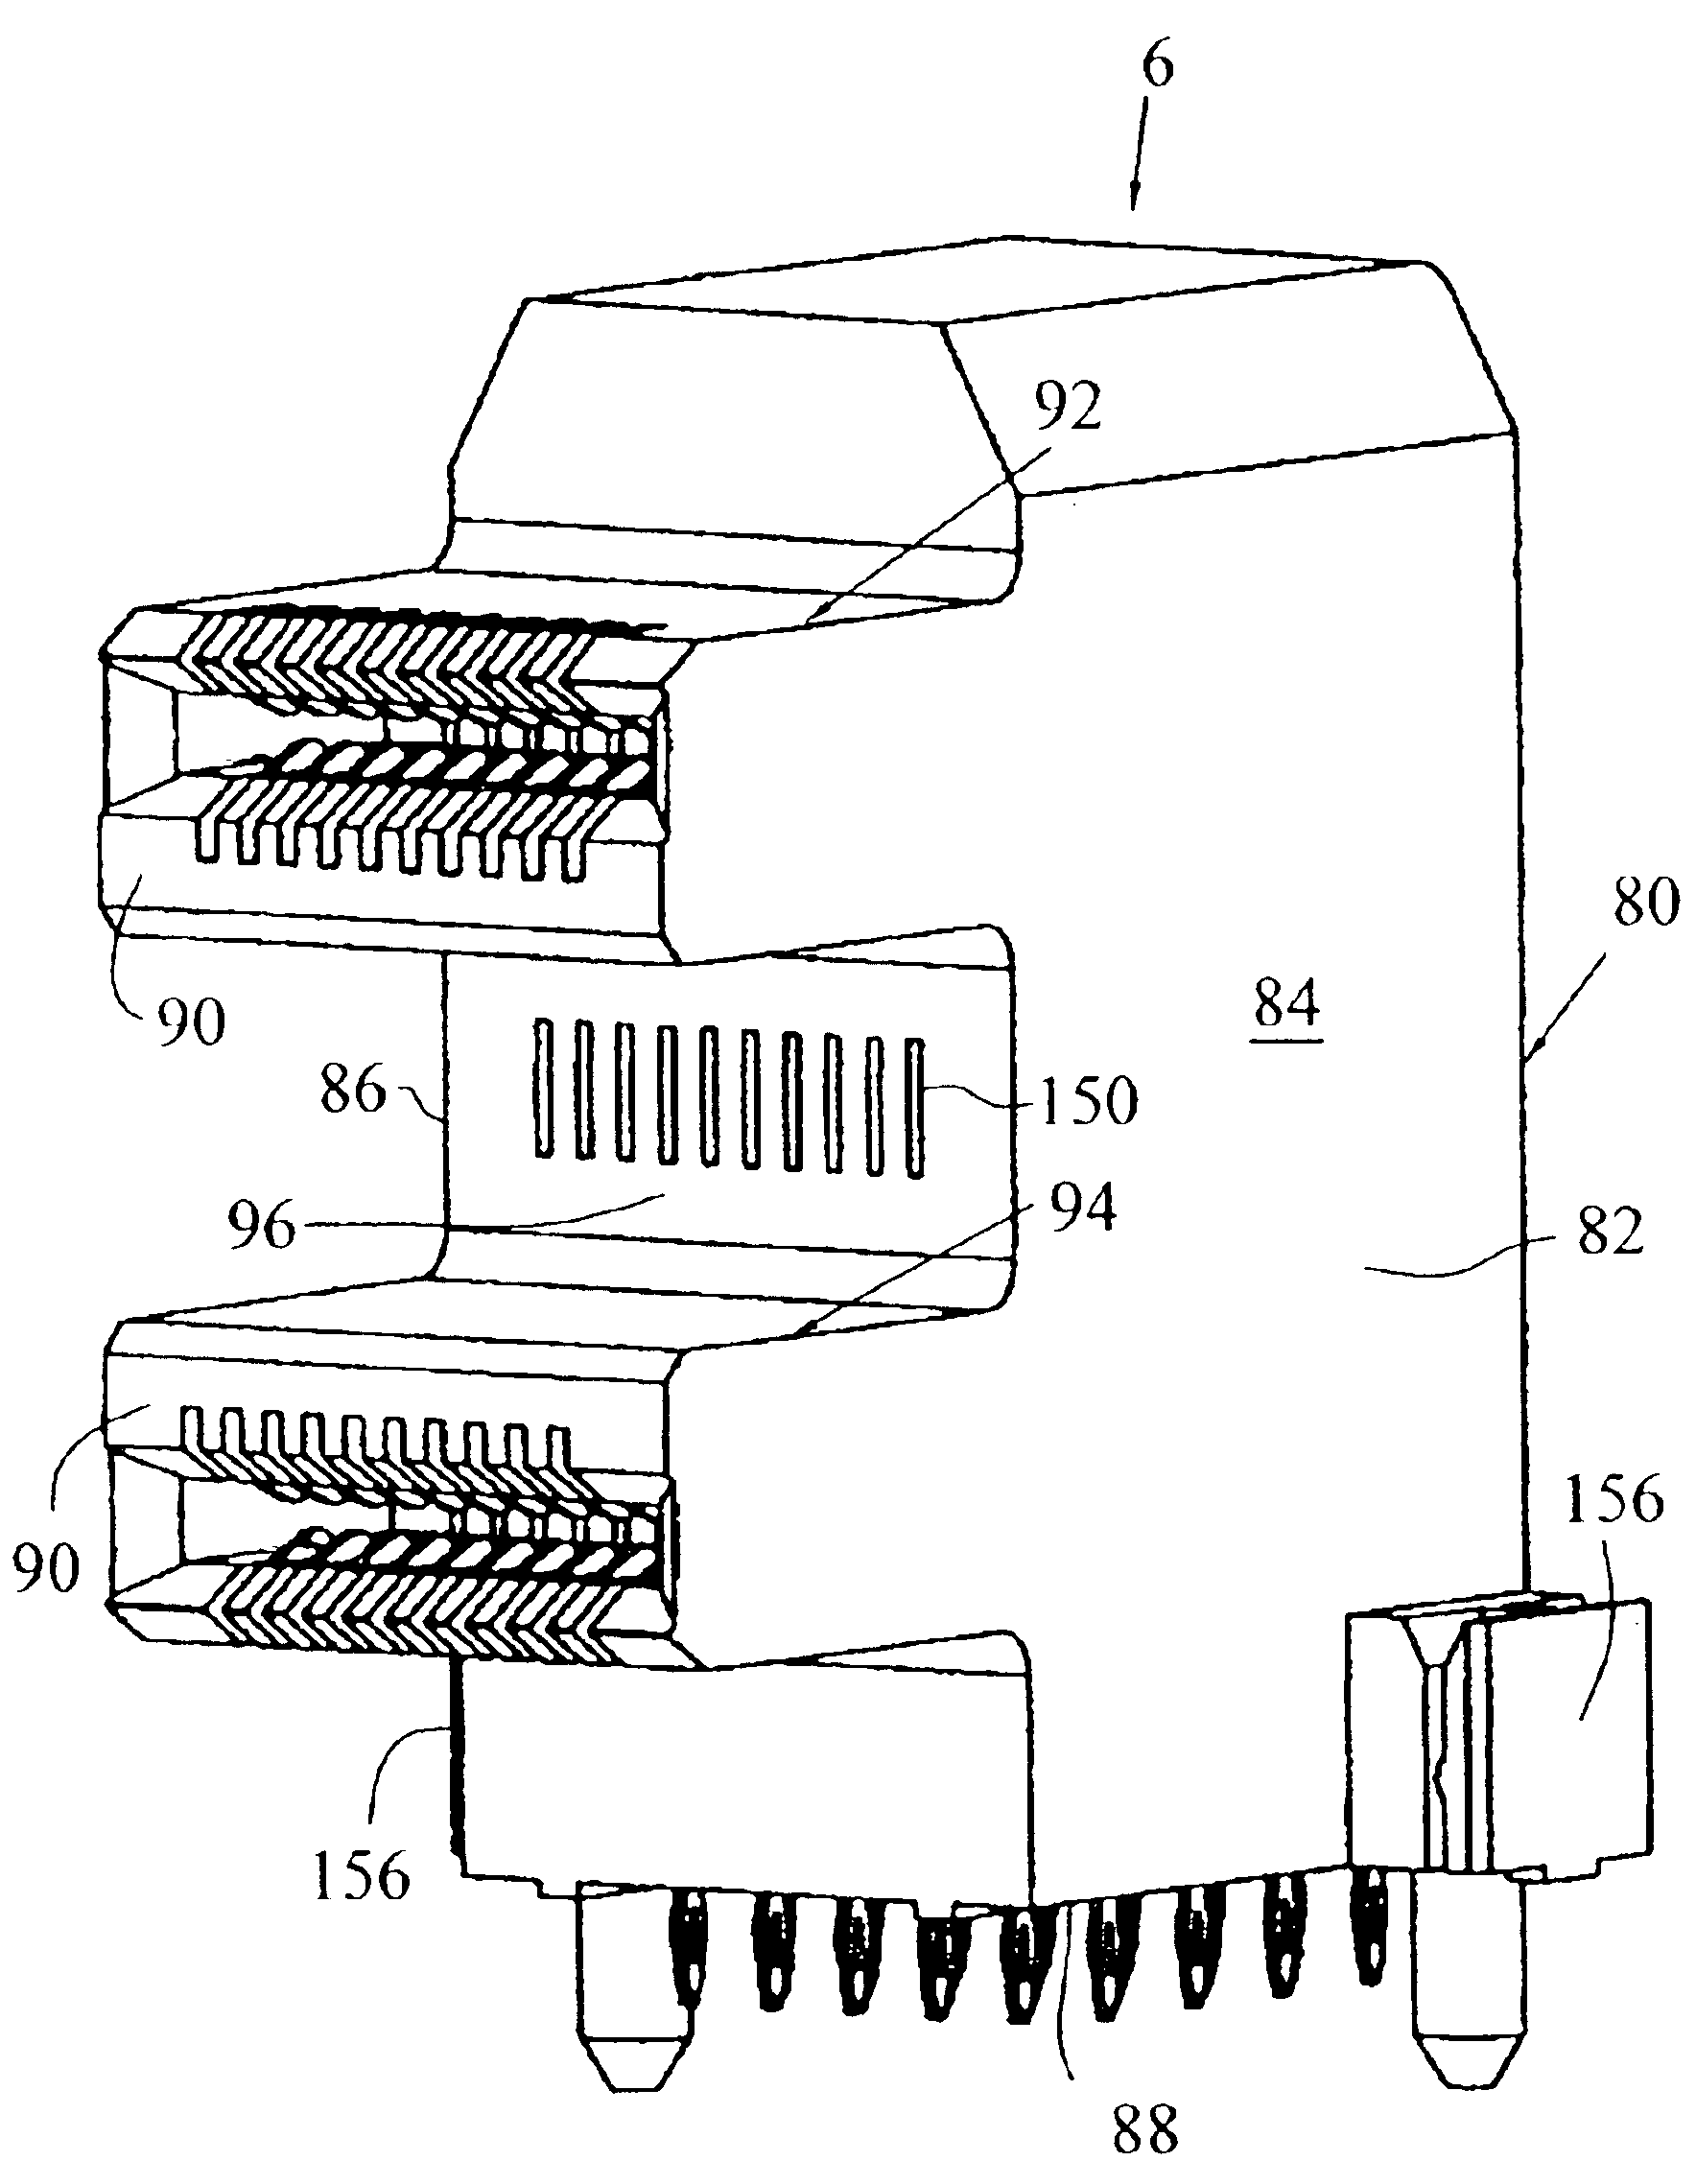 Stacked SFP connector and cage assembly